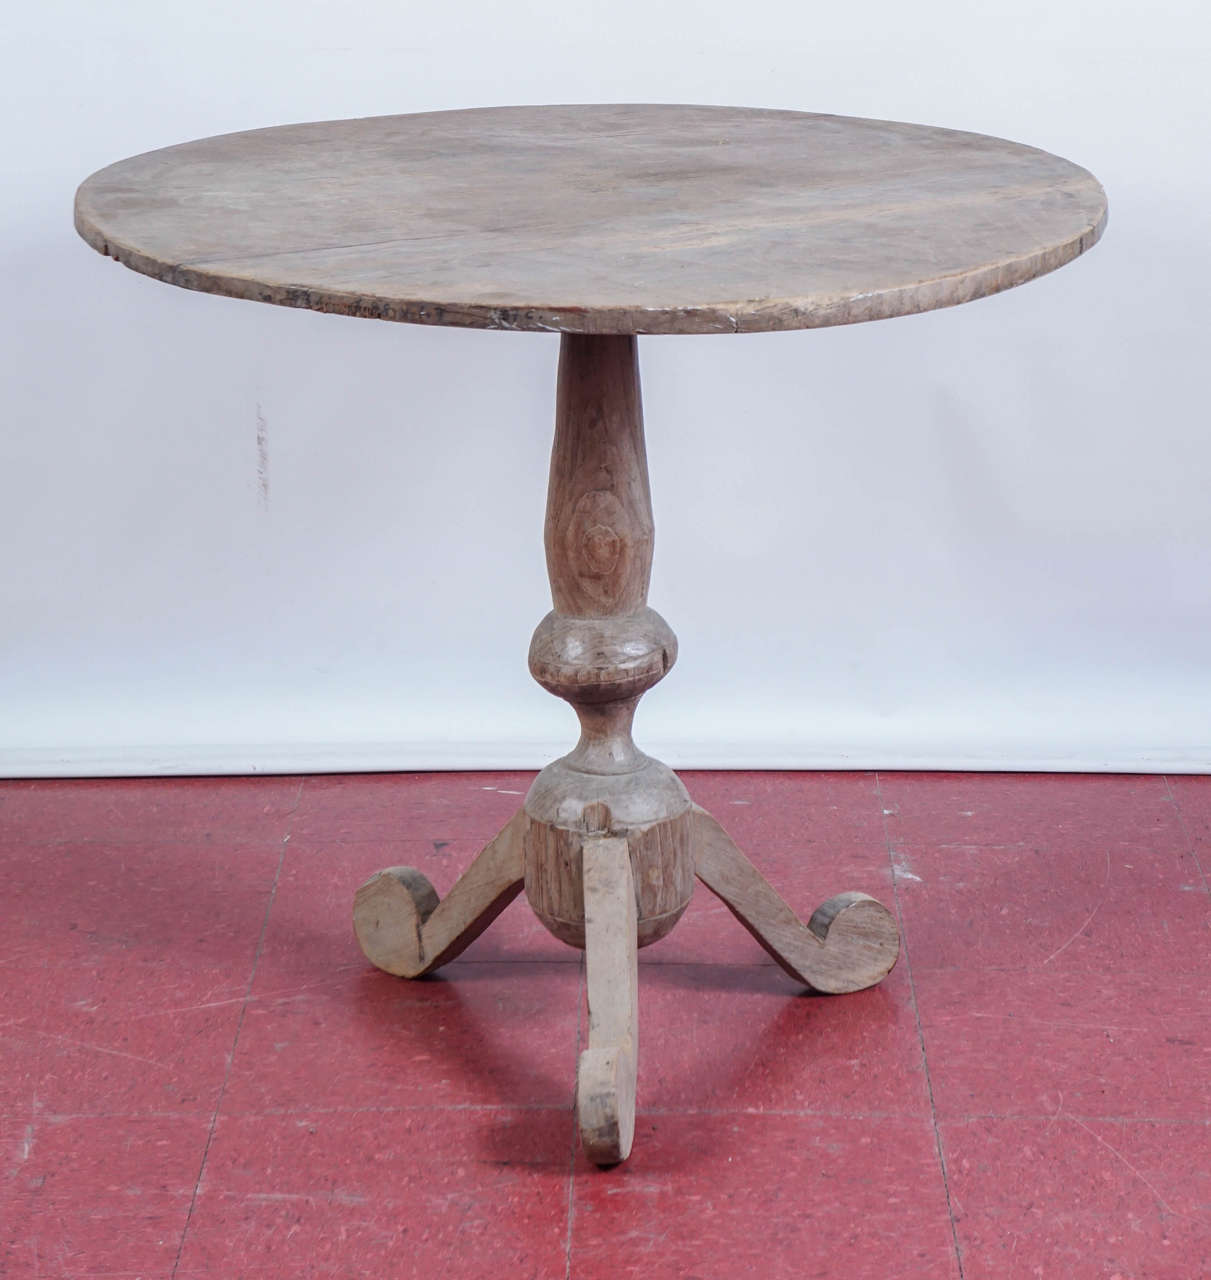 This single pedestal side table is uniquely and beautifully hand-carved throughout. Tea-table size, but perfect for dining table in a small home or kitchen.